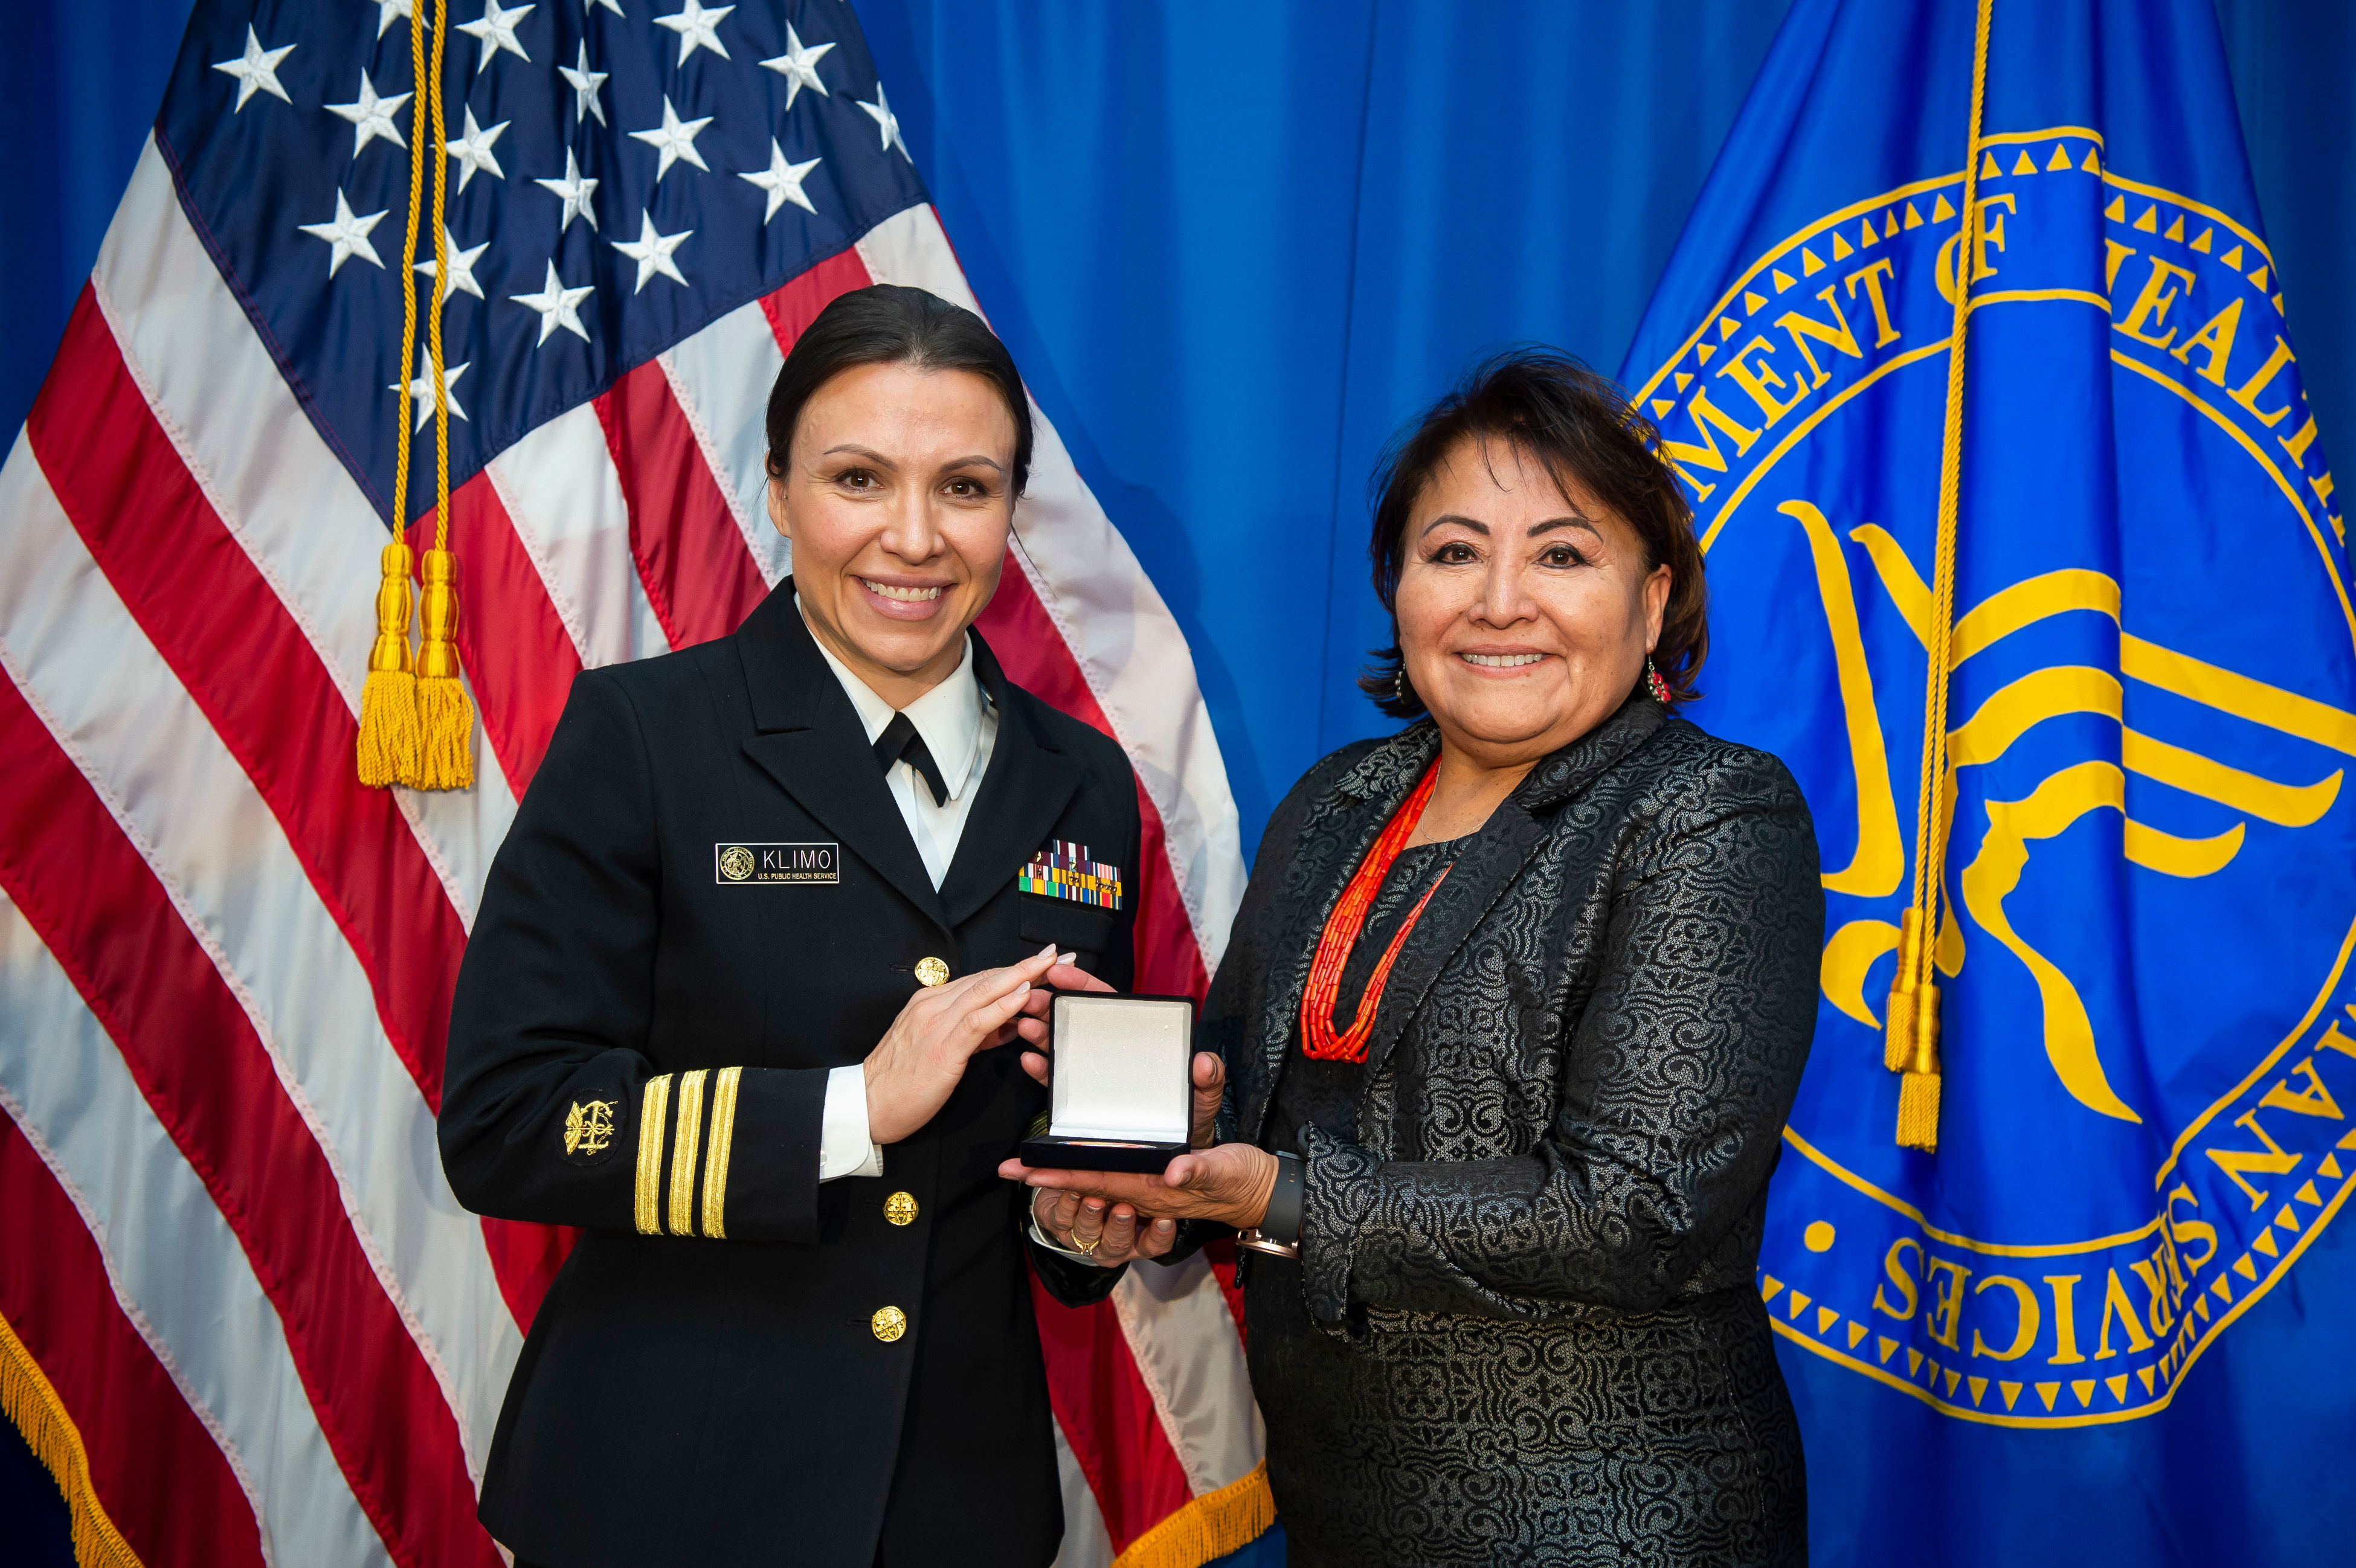 Commissioned Corps Meritorious Service Medal  - CDR Andrea Klimo (Oklahoma City )